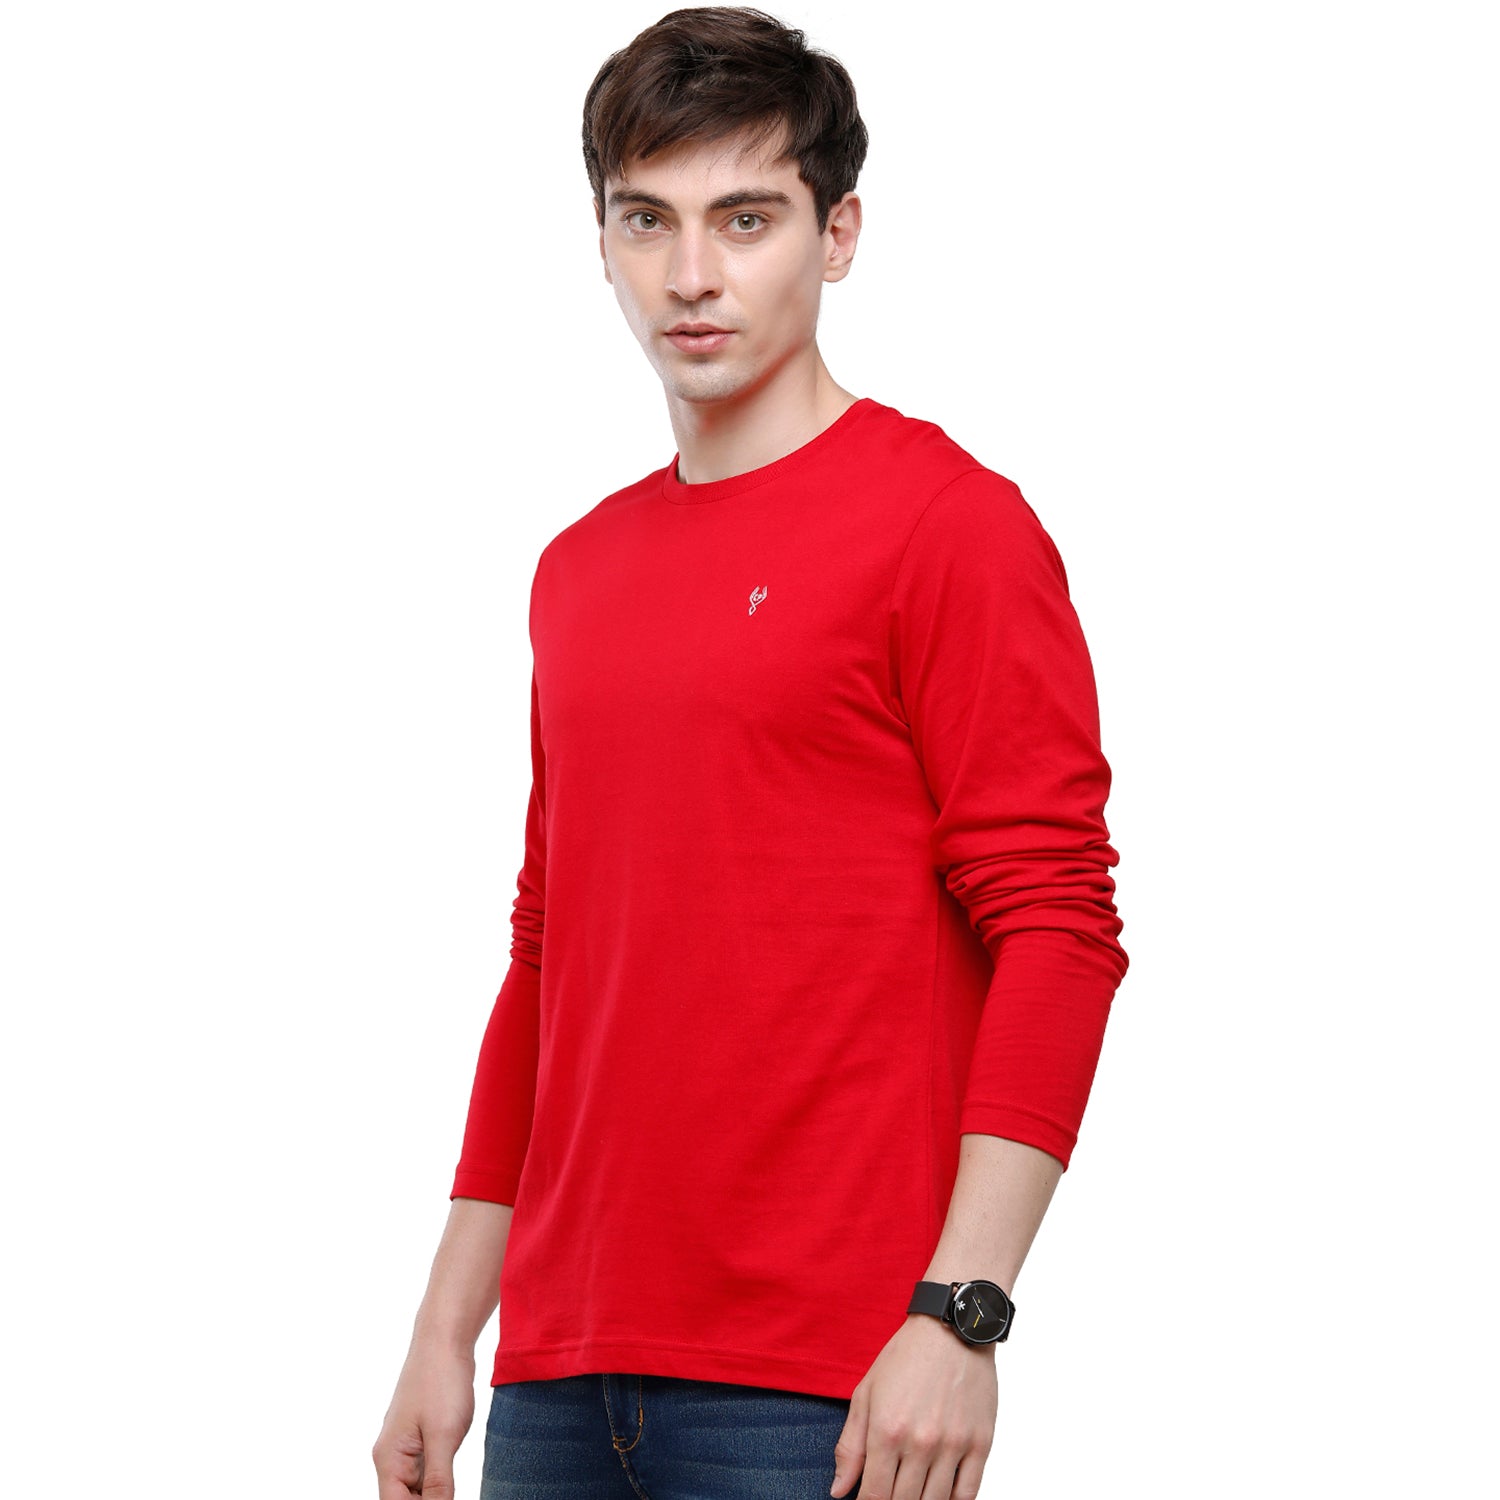 Classic polo Men's Red Single Jersey Crew Neck Full Sleeve Slim Fit T-Shirt - Comet 02 T-shirt Classic Polo 